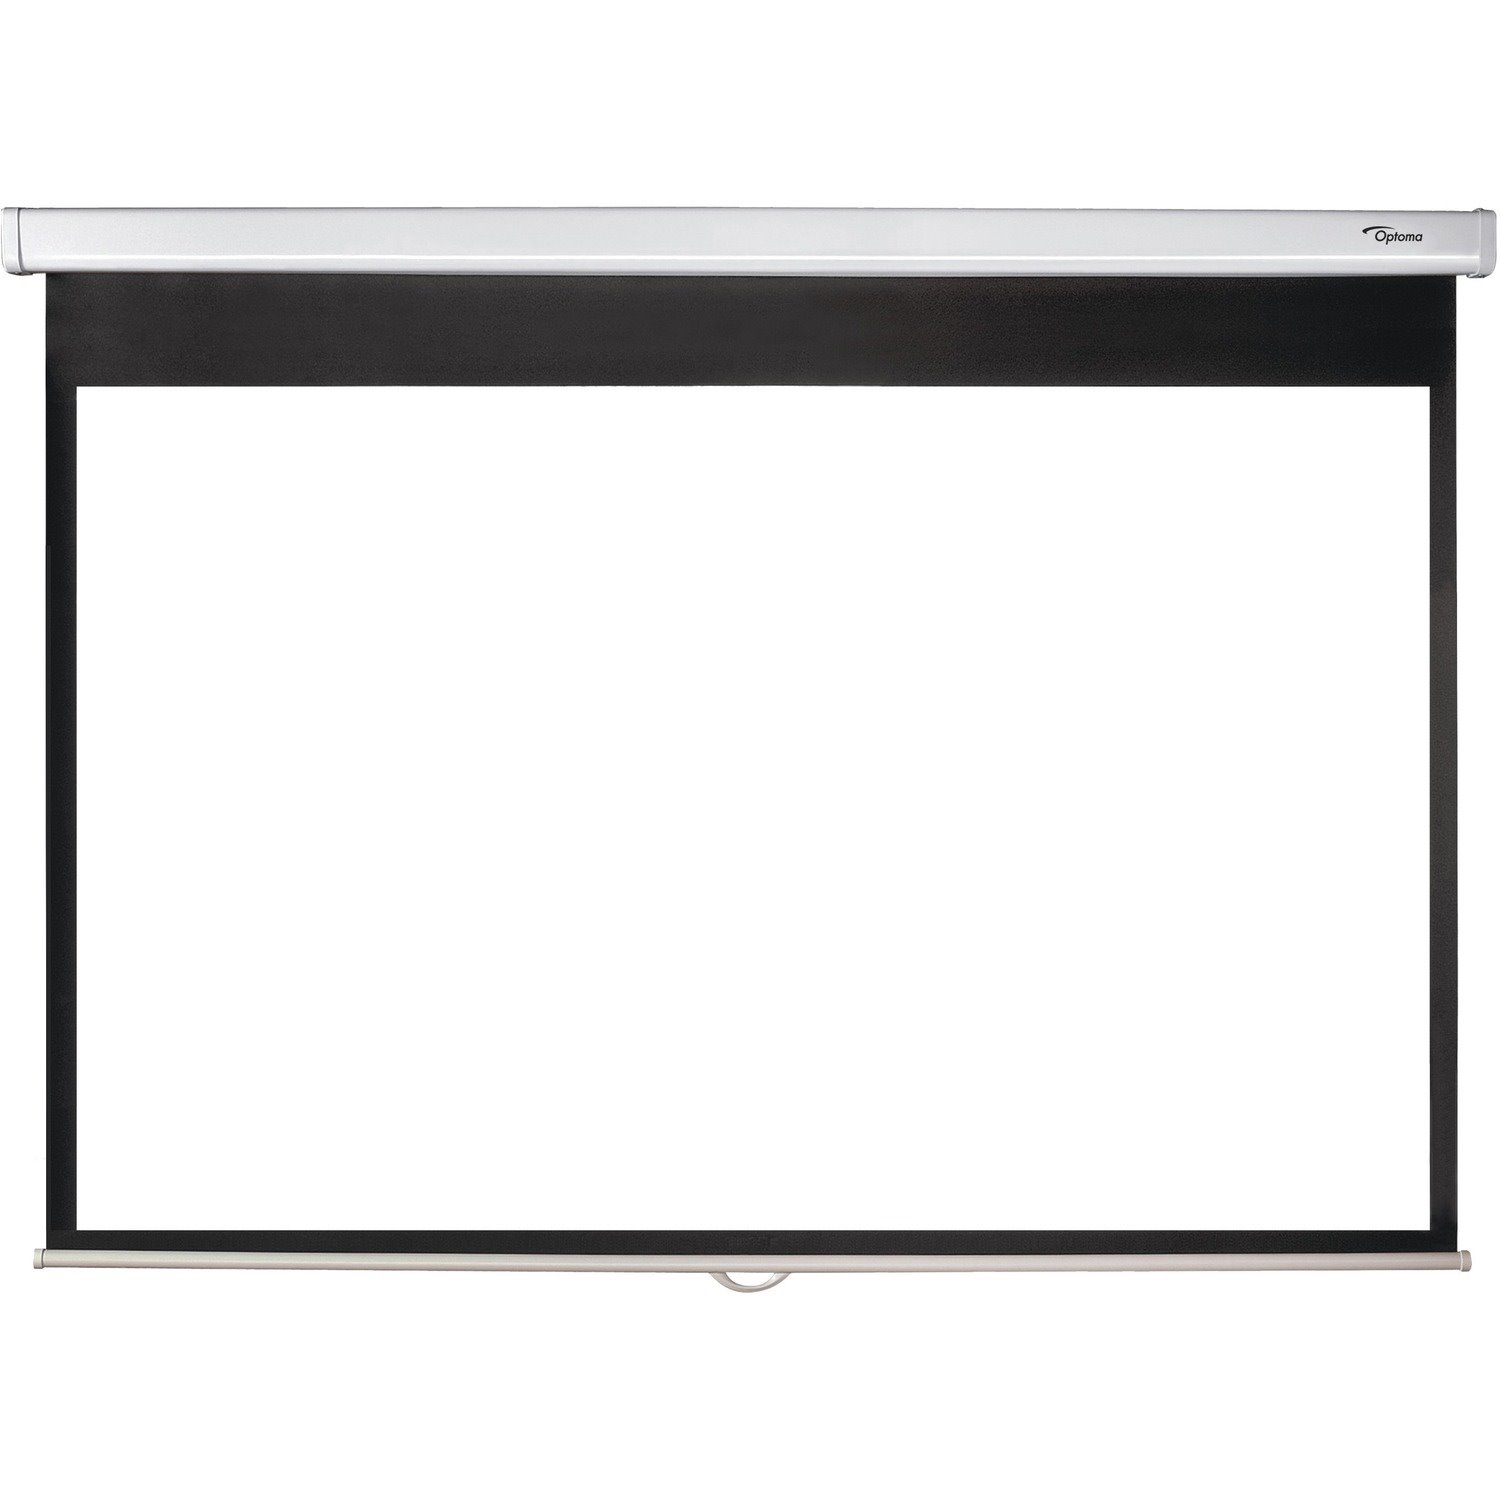 Optoma Manual DS-1095PMG+ 241.3 cm (95") Manual Projection Screen